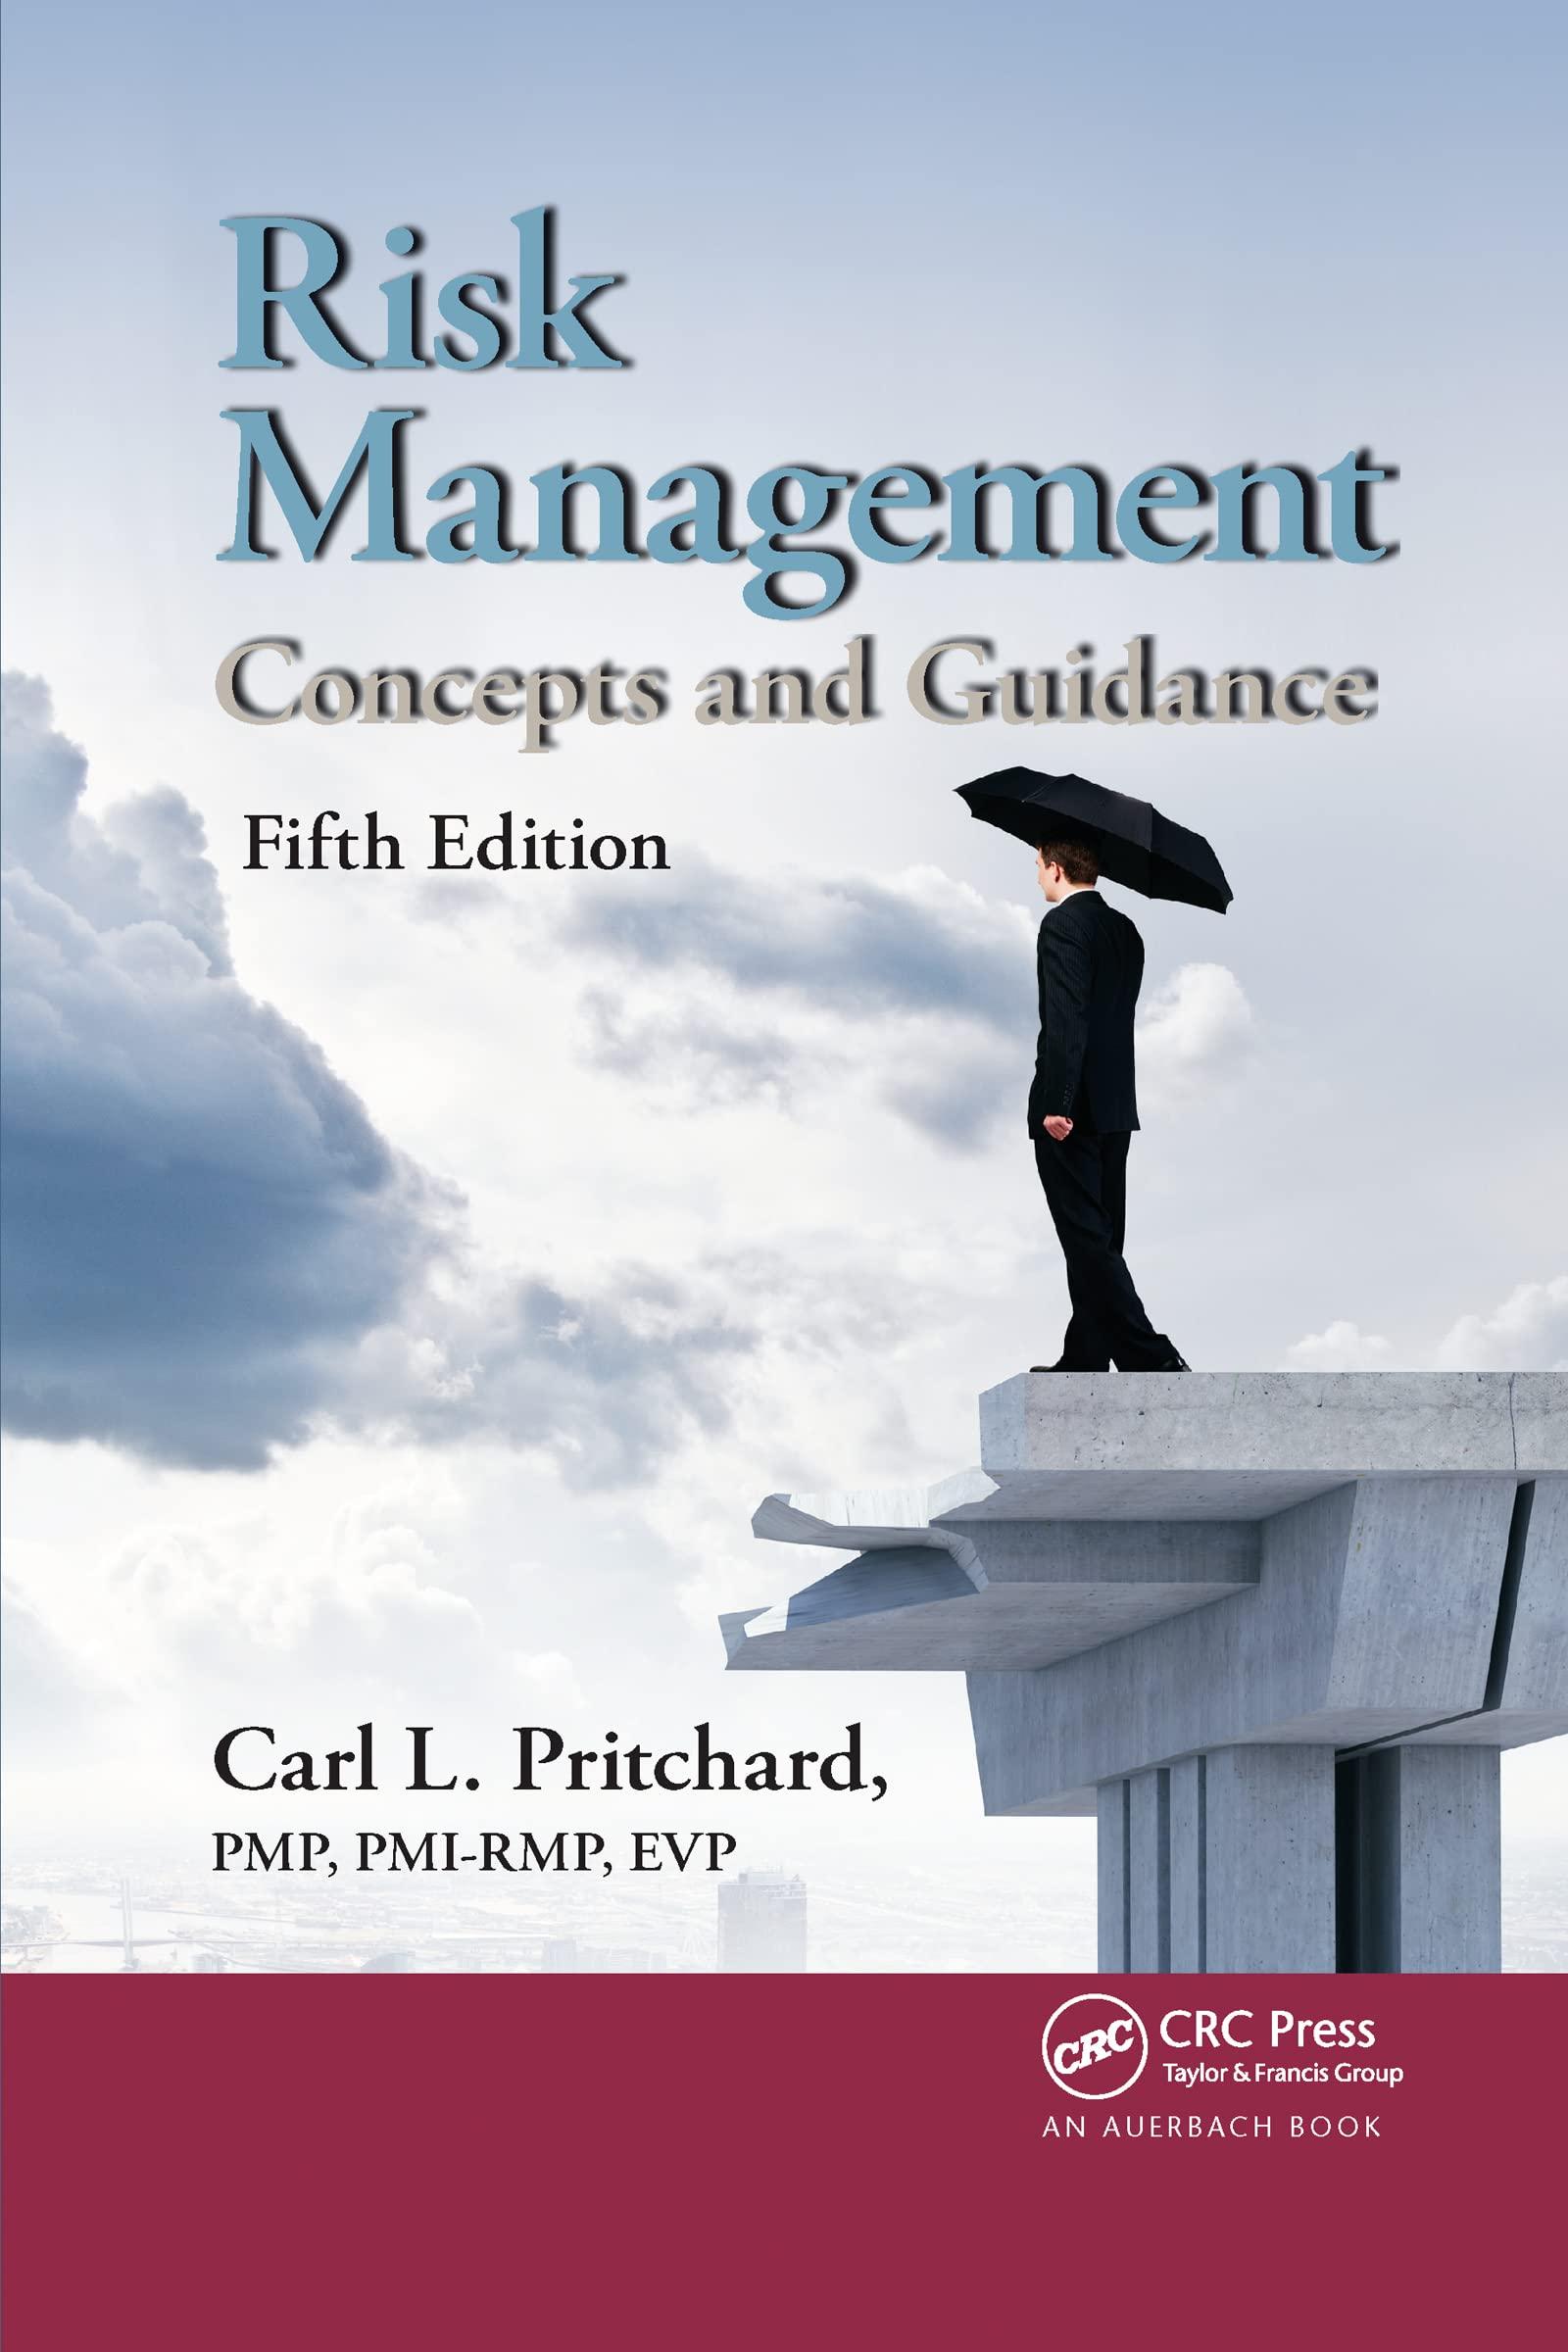 risk management concepts and guidance 5th edition carl l. pritchard 1032340207, 978-1032340203